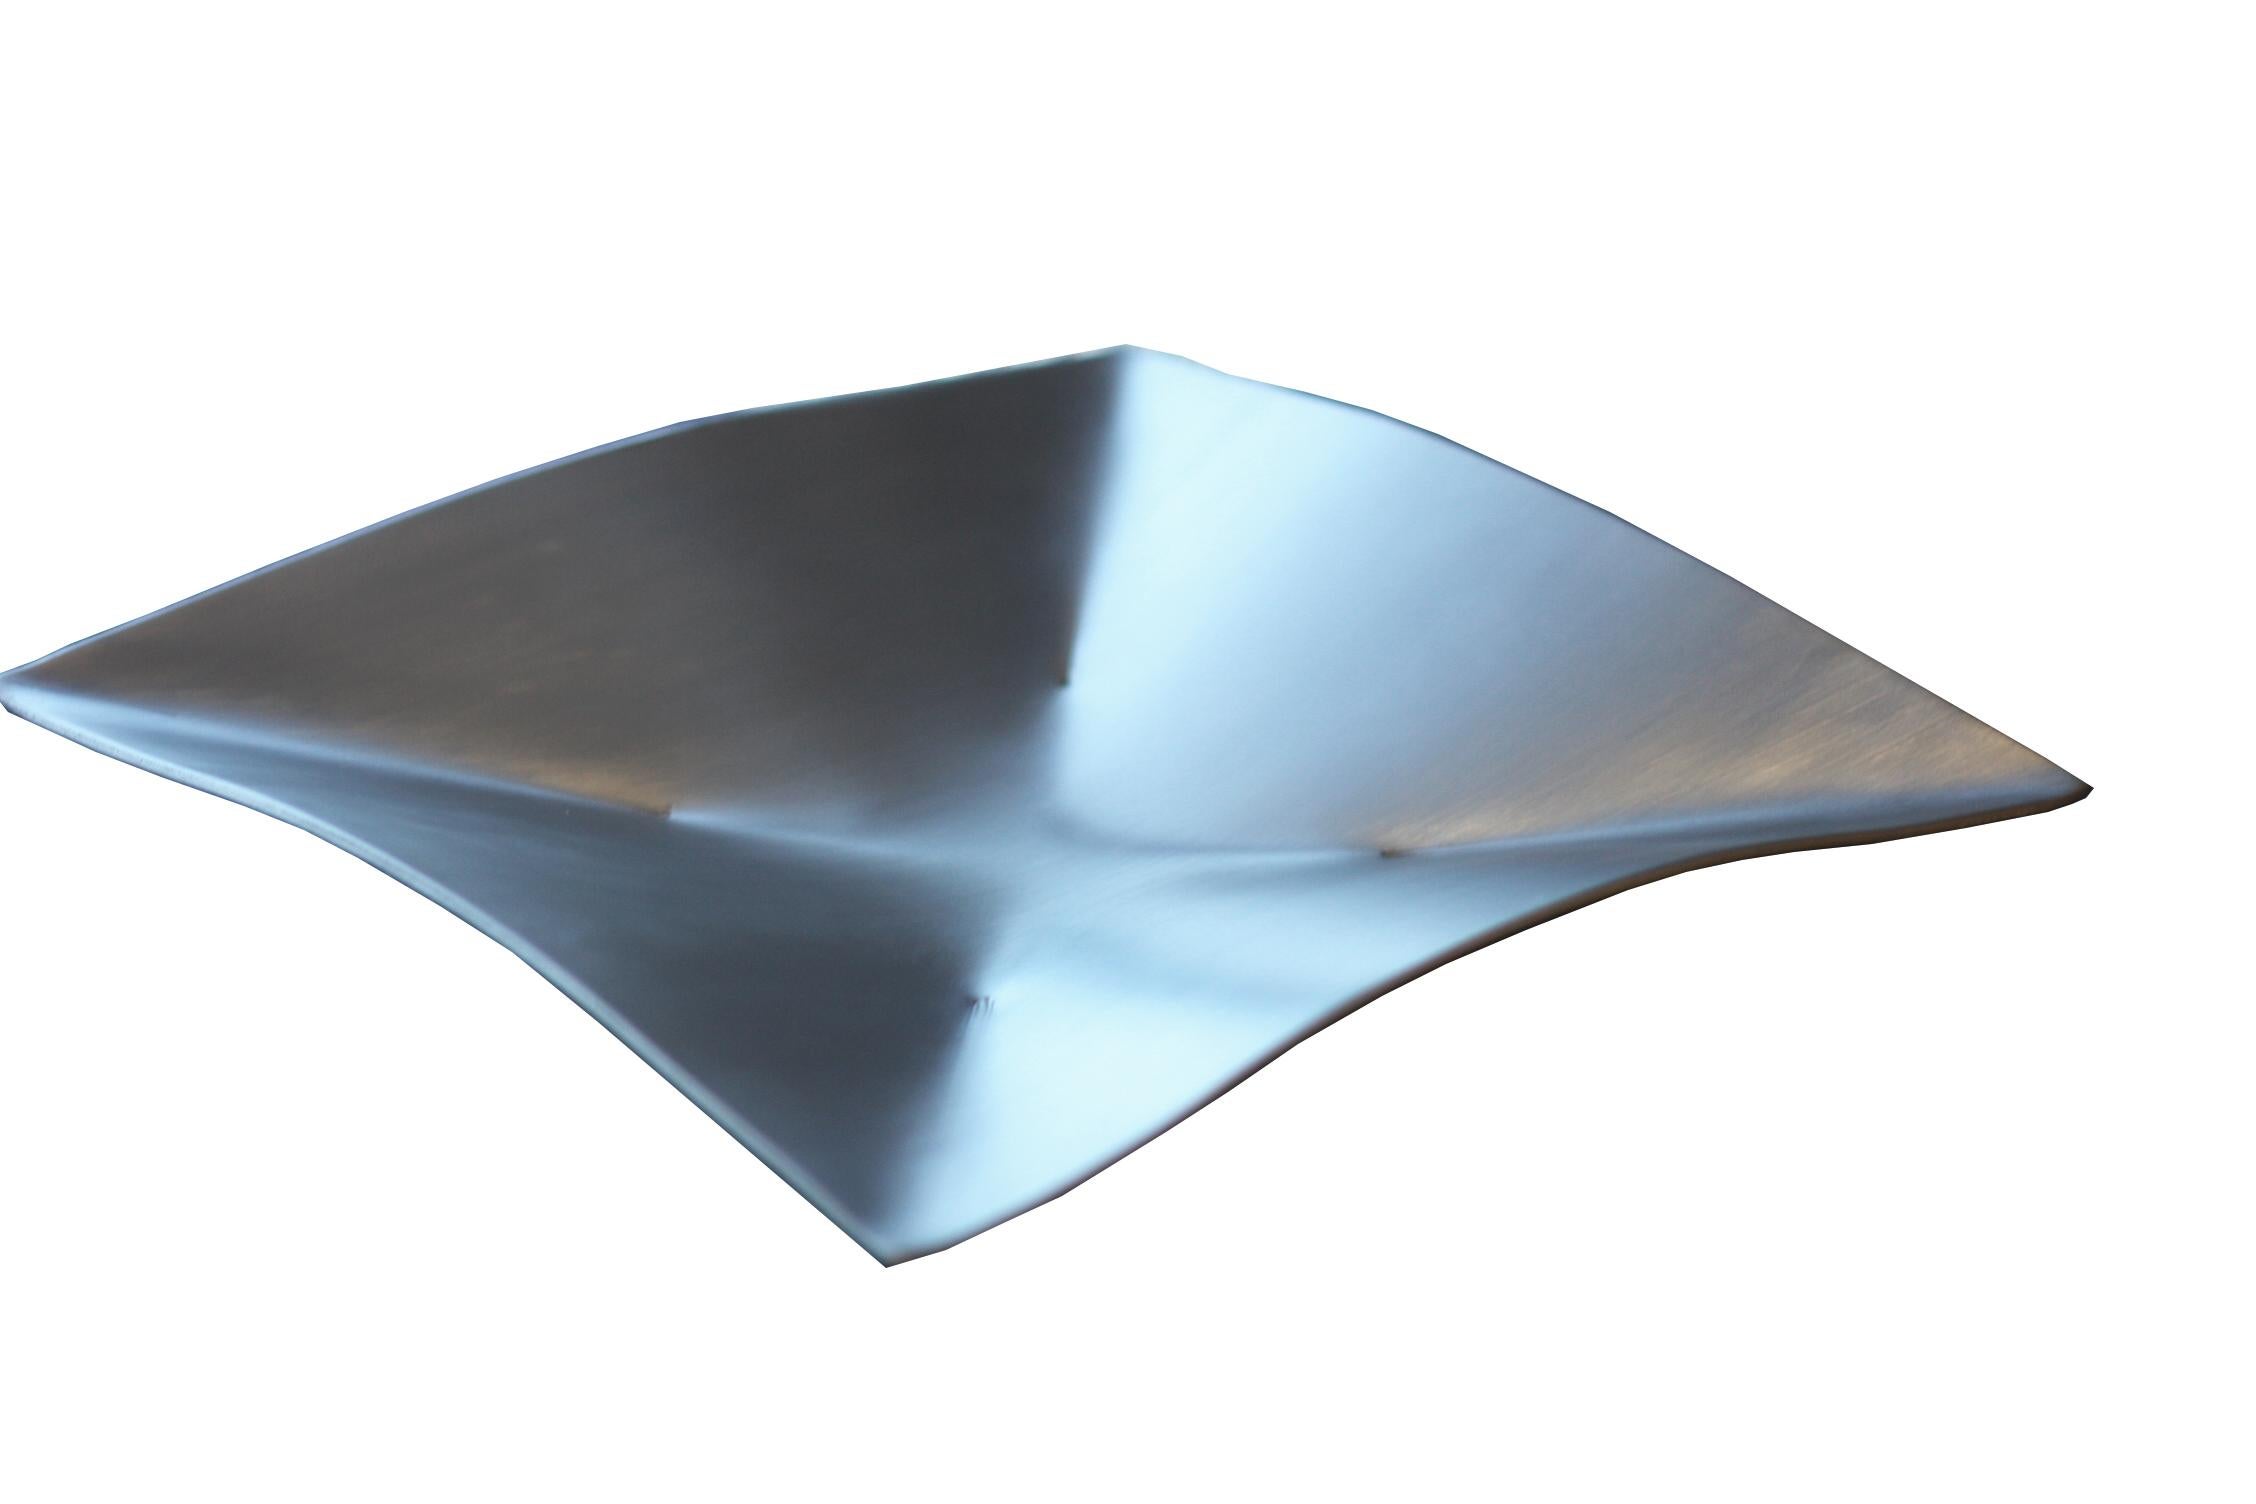 Minimalist Metal Tray in Raw Waxed Aluminum, Origami Style, Contemporary Design by Mtharu For Sale